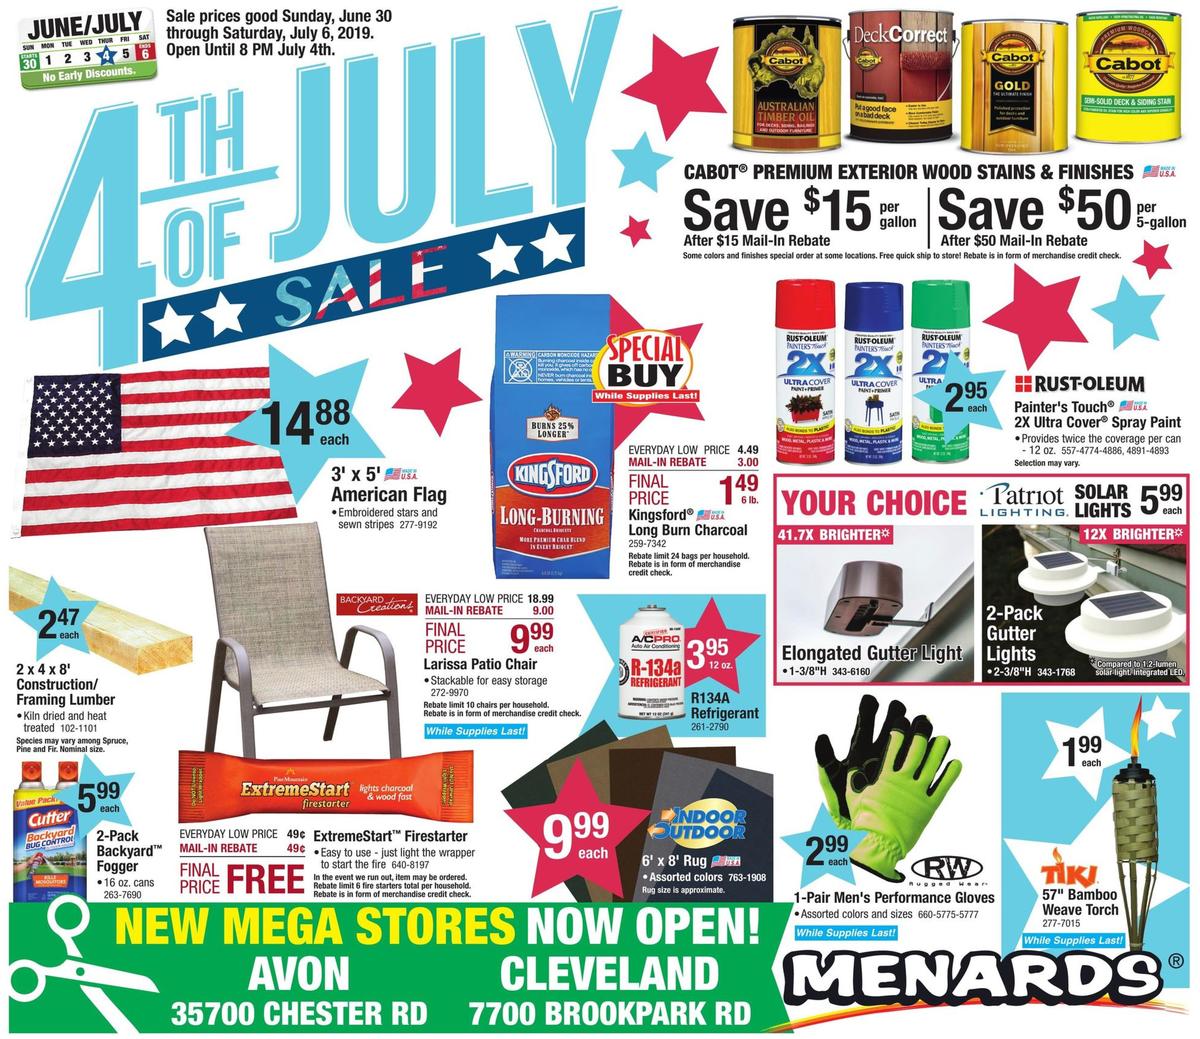 Menards 4th of July Sale Weekly Ads & Special Buys from June 30